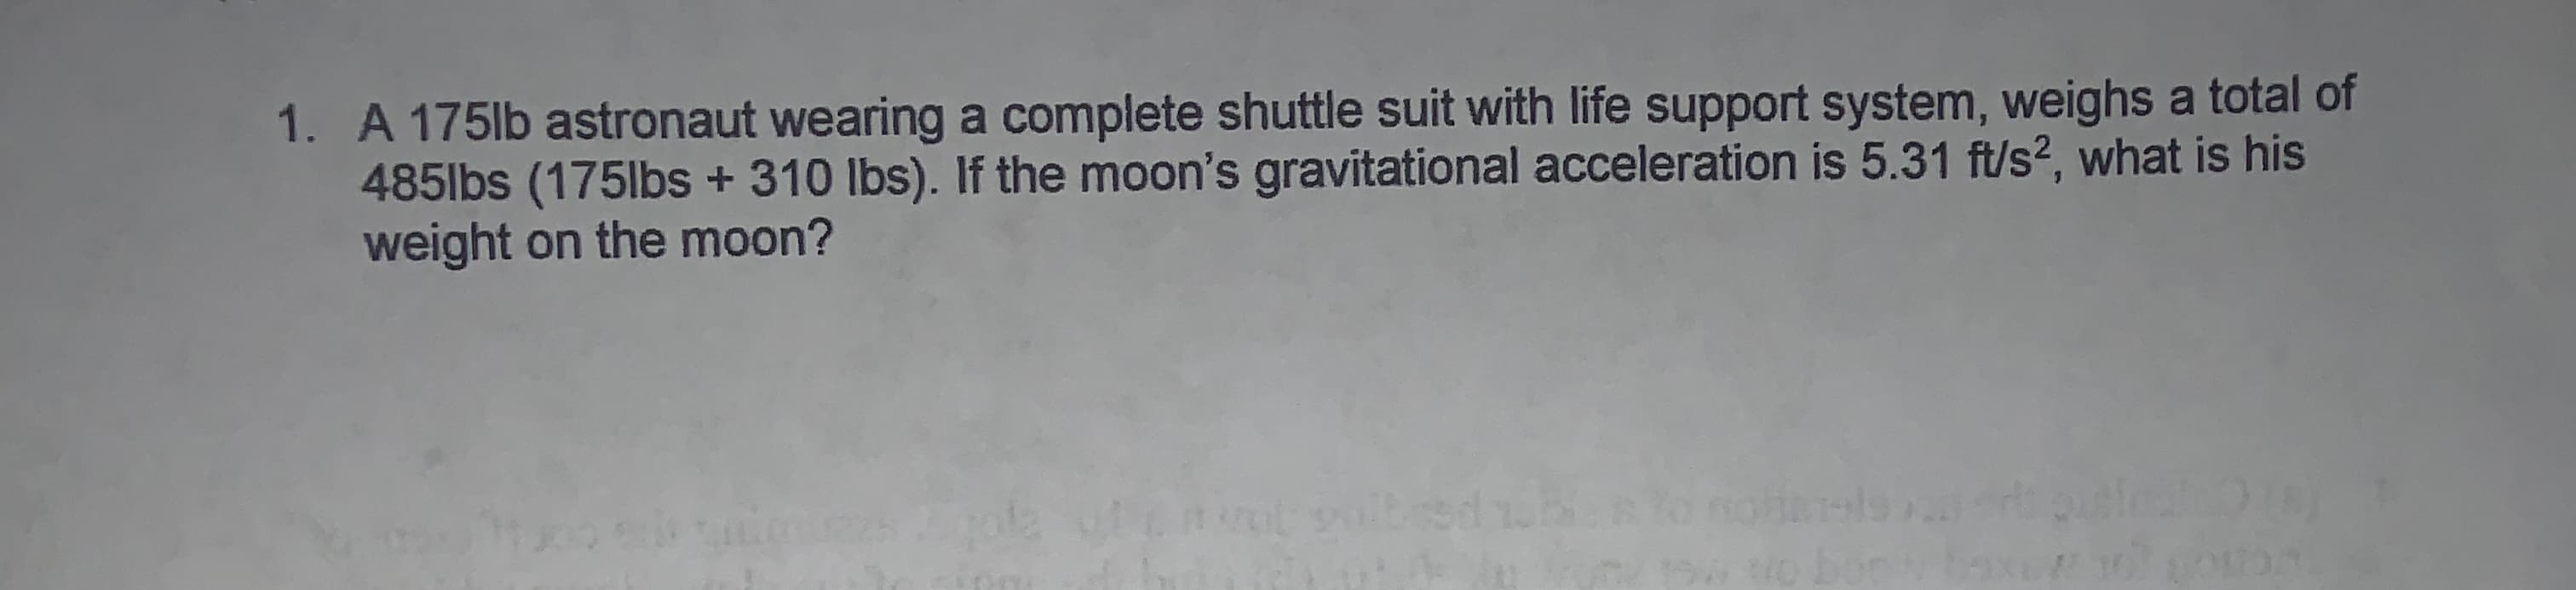 1. A 175lb astronaut wearing a complete shuttle suit with life support system, weighs a total of
4851bs (175lbs + 310 lbs). If the moon's gravitational acceleration is 5.31 ft/s2, what is his
weight on the moon?
